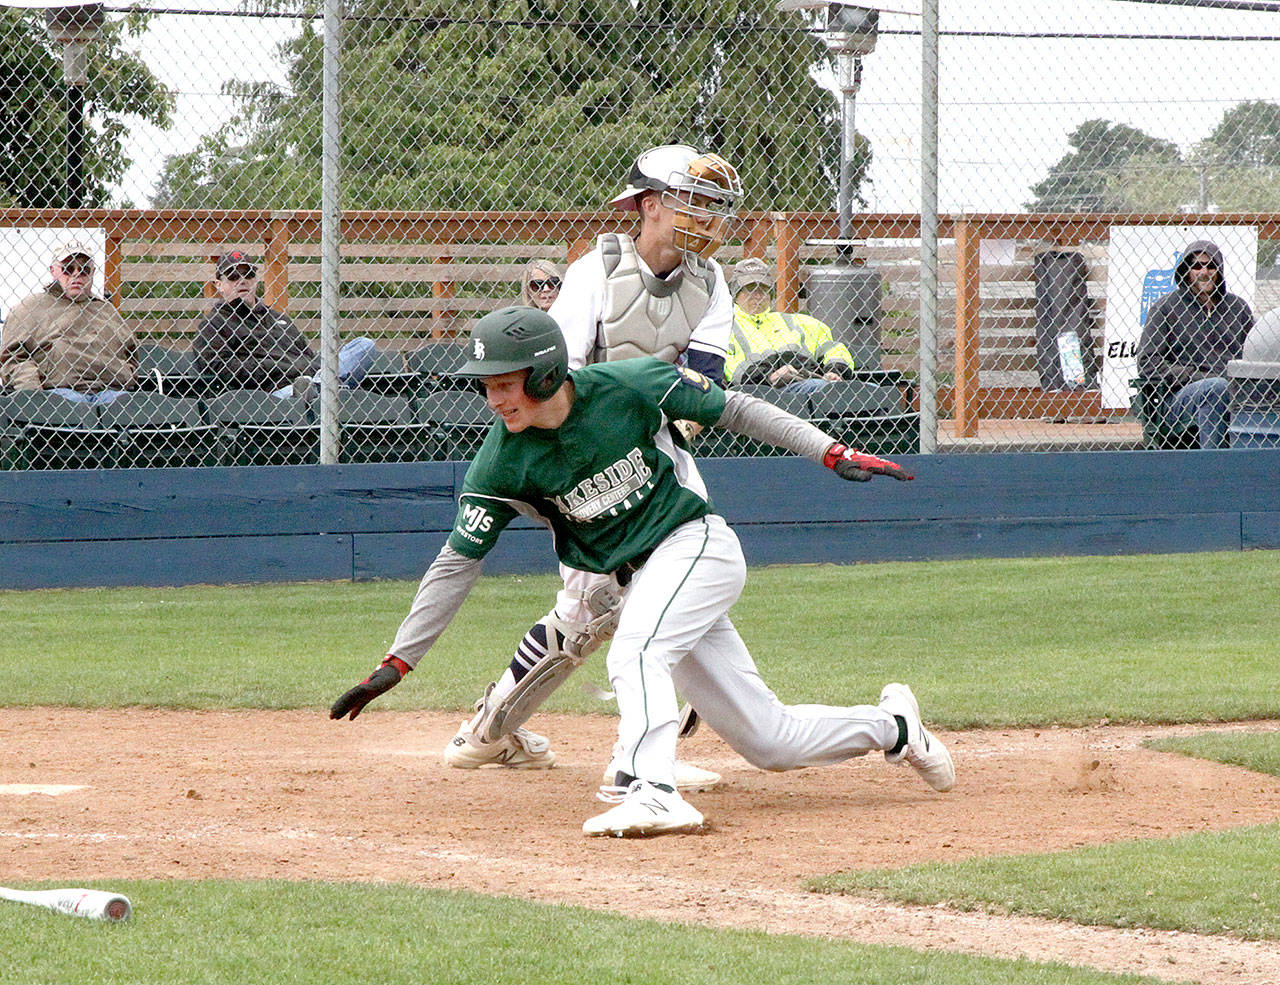 Lakeside’s Nate Moore tries to score around Wilder catcher Joel Wood waits with the ball in his mitt Sunday at Civic Field. Wood held onto the ball and Moore was called out. Wilder split with first-place Lakeside, losing the first game of a doubleheader 3-0, but winning the nightcap 5-4. (Dave Logan/for Peninsula Daily News)